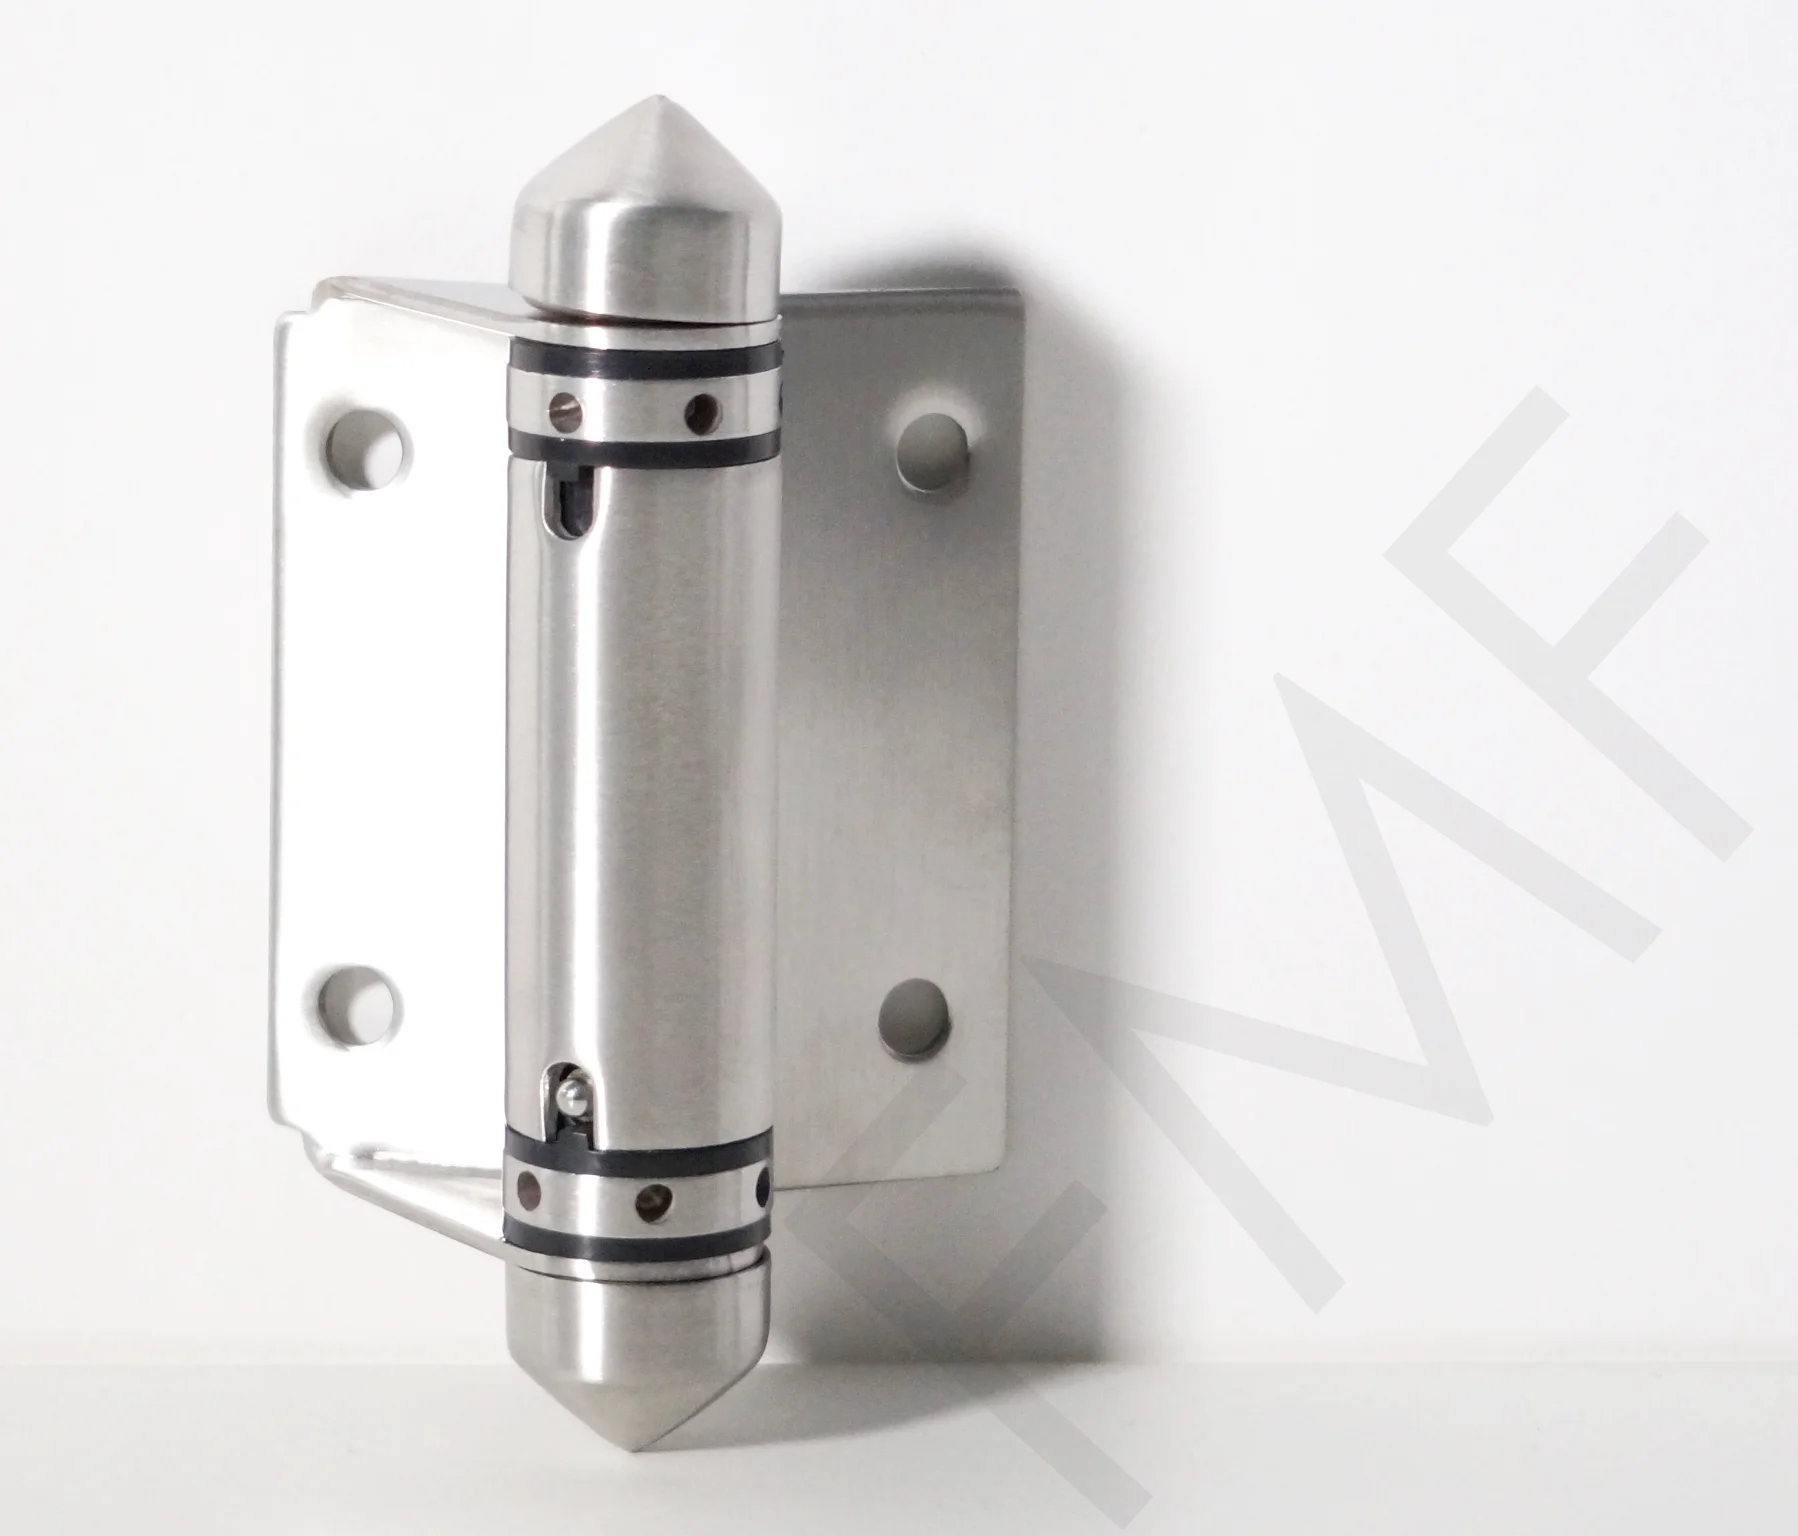 Try our Hydraulic Self-Closing Hinge, Glass-to-Glass for gates. Assisted for easy opening of the gates, these hinges allow the doors to self-close from any position and prevent unnecessary slamming against the latch. You can also regulate the speed of the hinges for opening and closing. Designed to be mounted on the glass, these hinges are suitable for interior and exterior use in residential and commercial properties. Made of premium quality Stainless Steel, the hinges surpass the industry standards and stay durable for a long time.